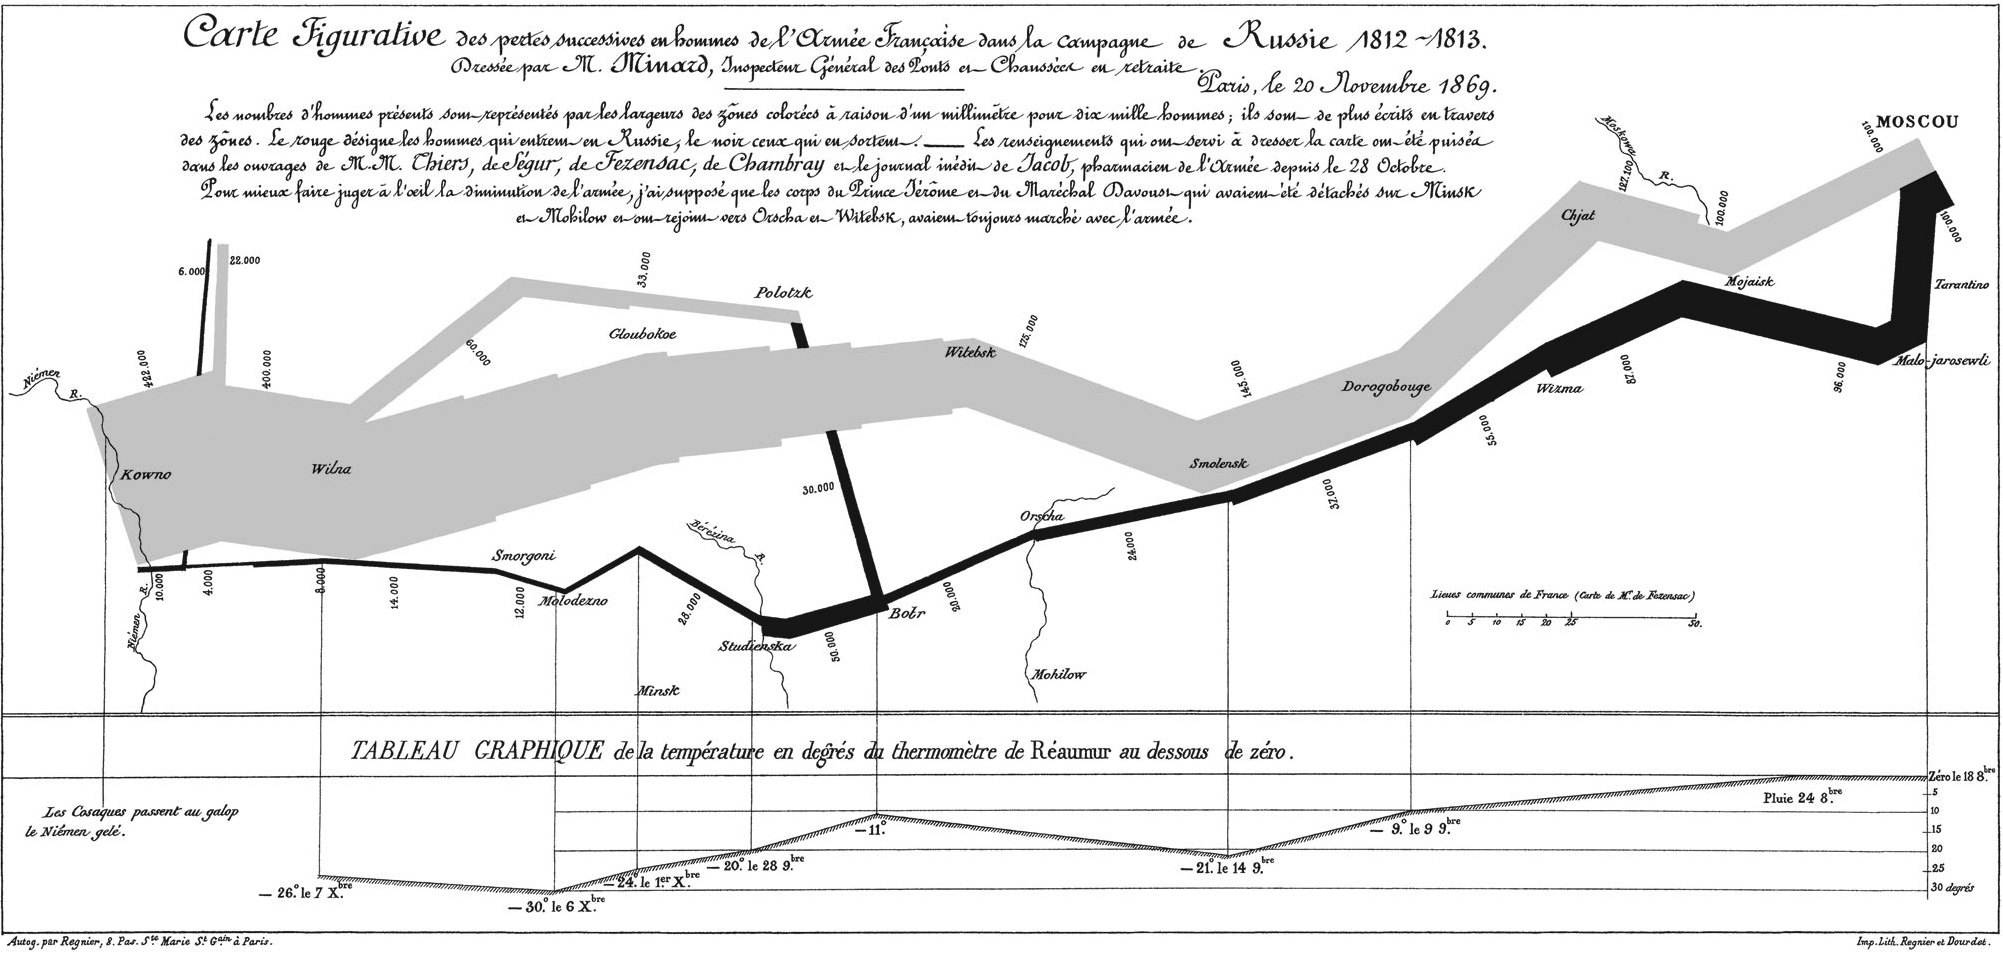 Charles Minard's Map of Napolean's 1812 Russian Campaign